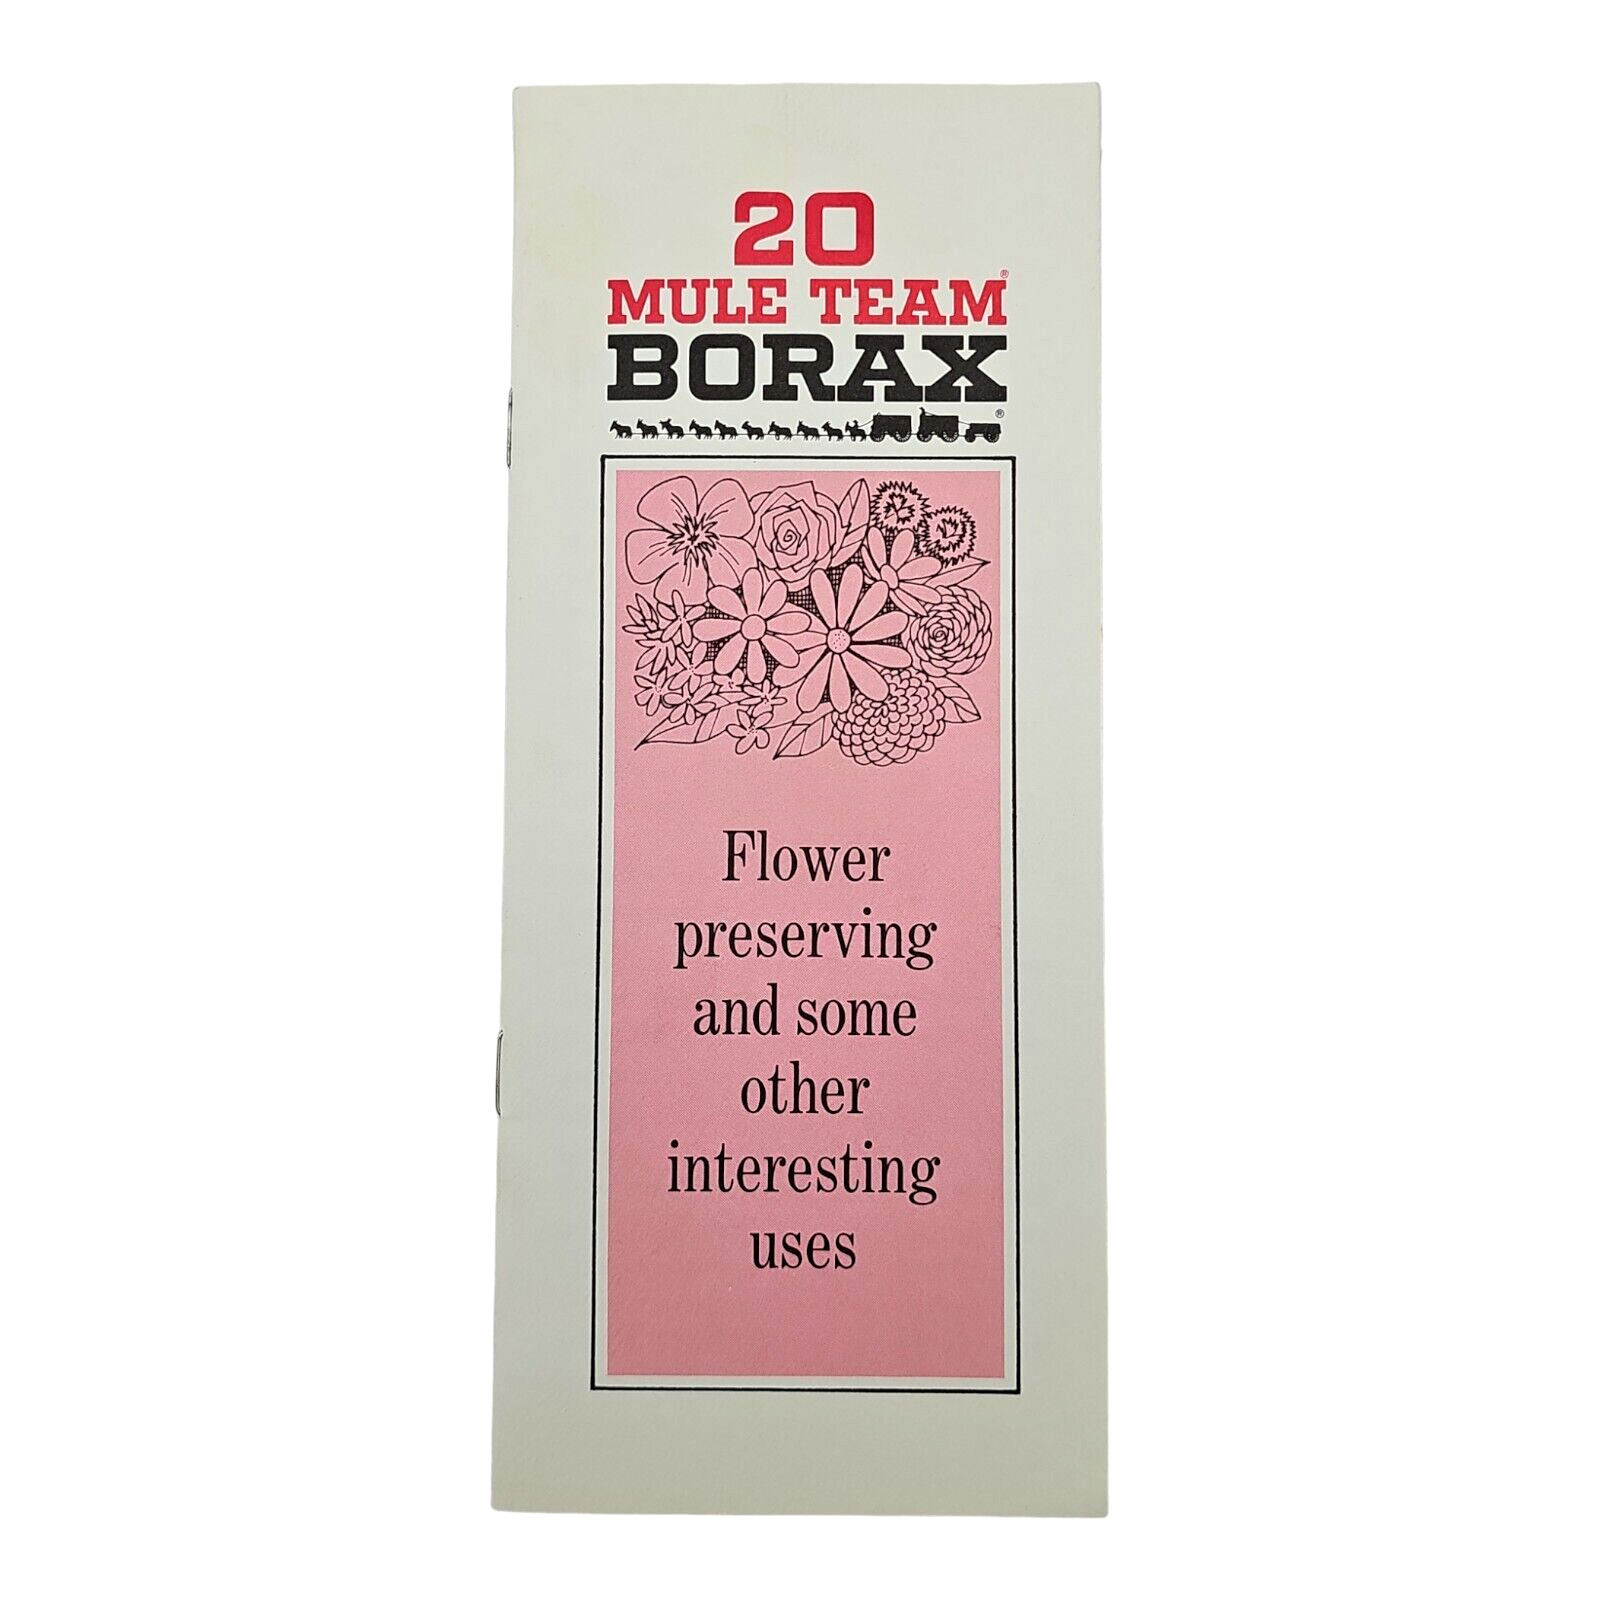 20 Mule Team Borax Soap Pamphlet Flower Preserving and Some Other Uses Vintage